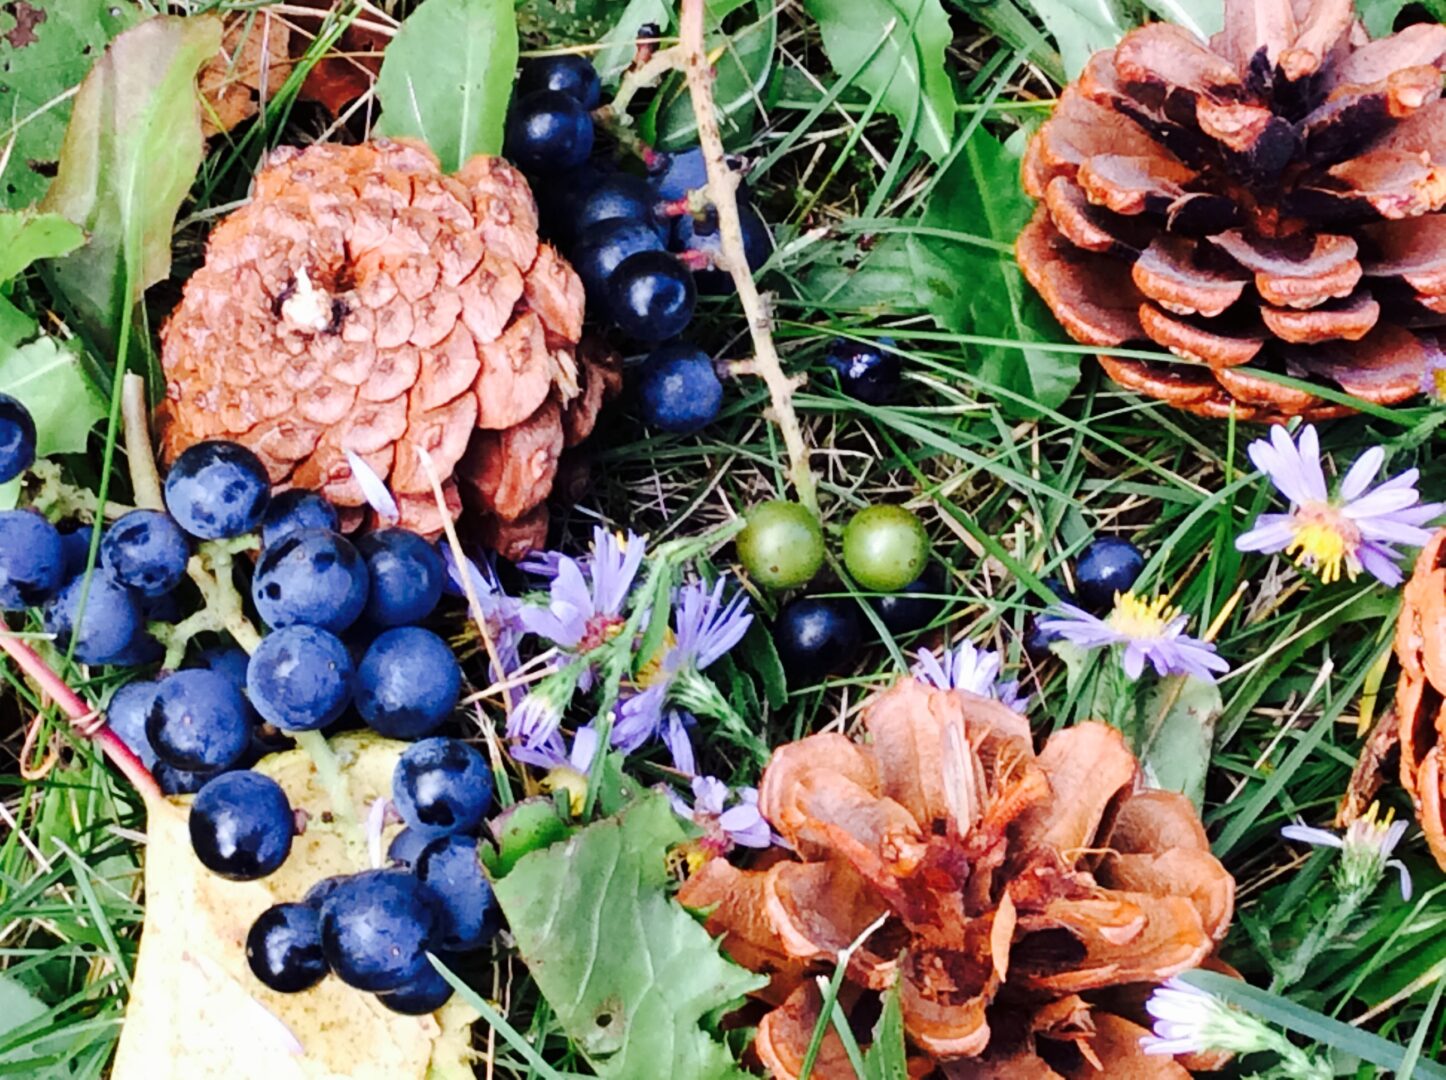 Image of berries and pinecones on the ground